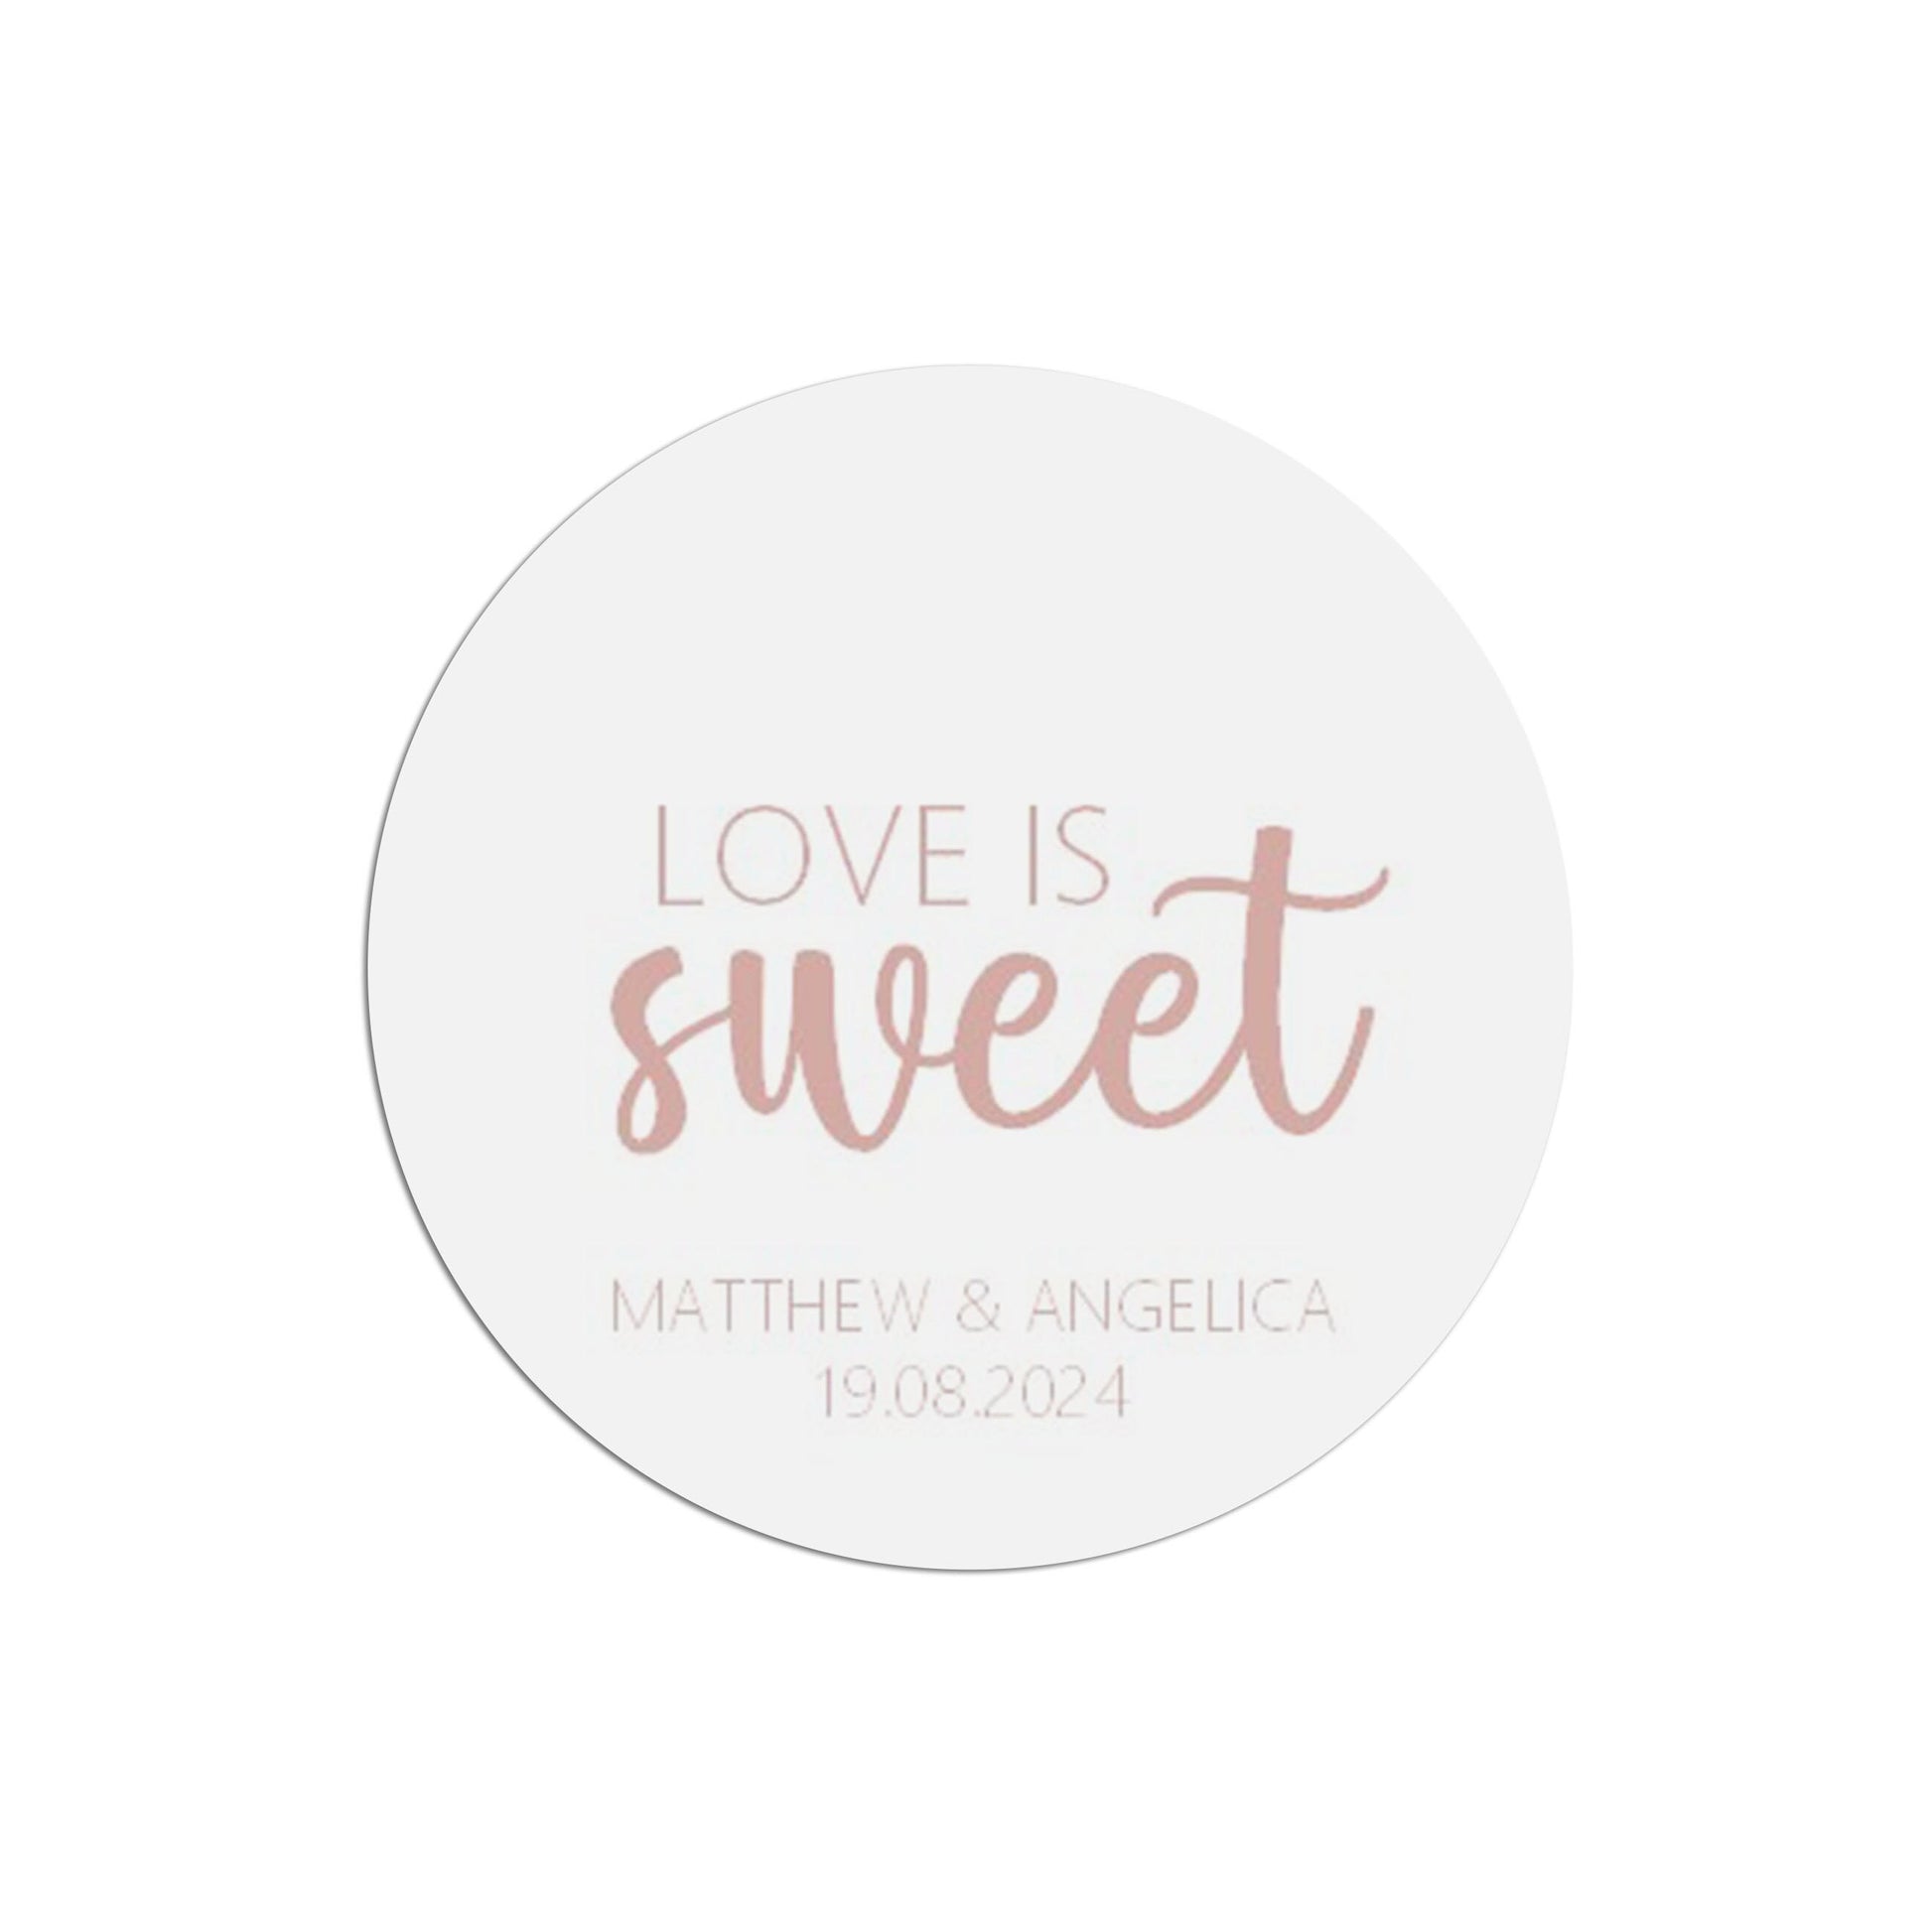 Love Is Sweet Wedding Sticker, Rose Gold Effect 37mm Round With Personalisation At The Bottom x 35 Stickers Per Sheet